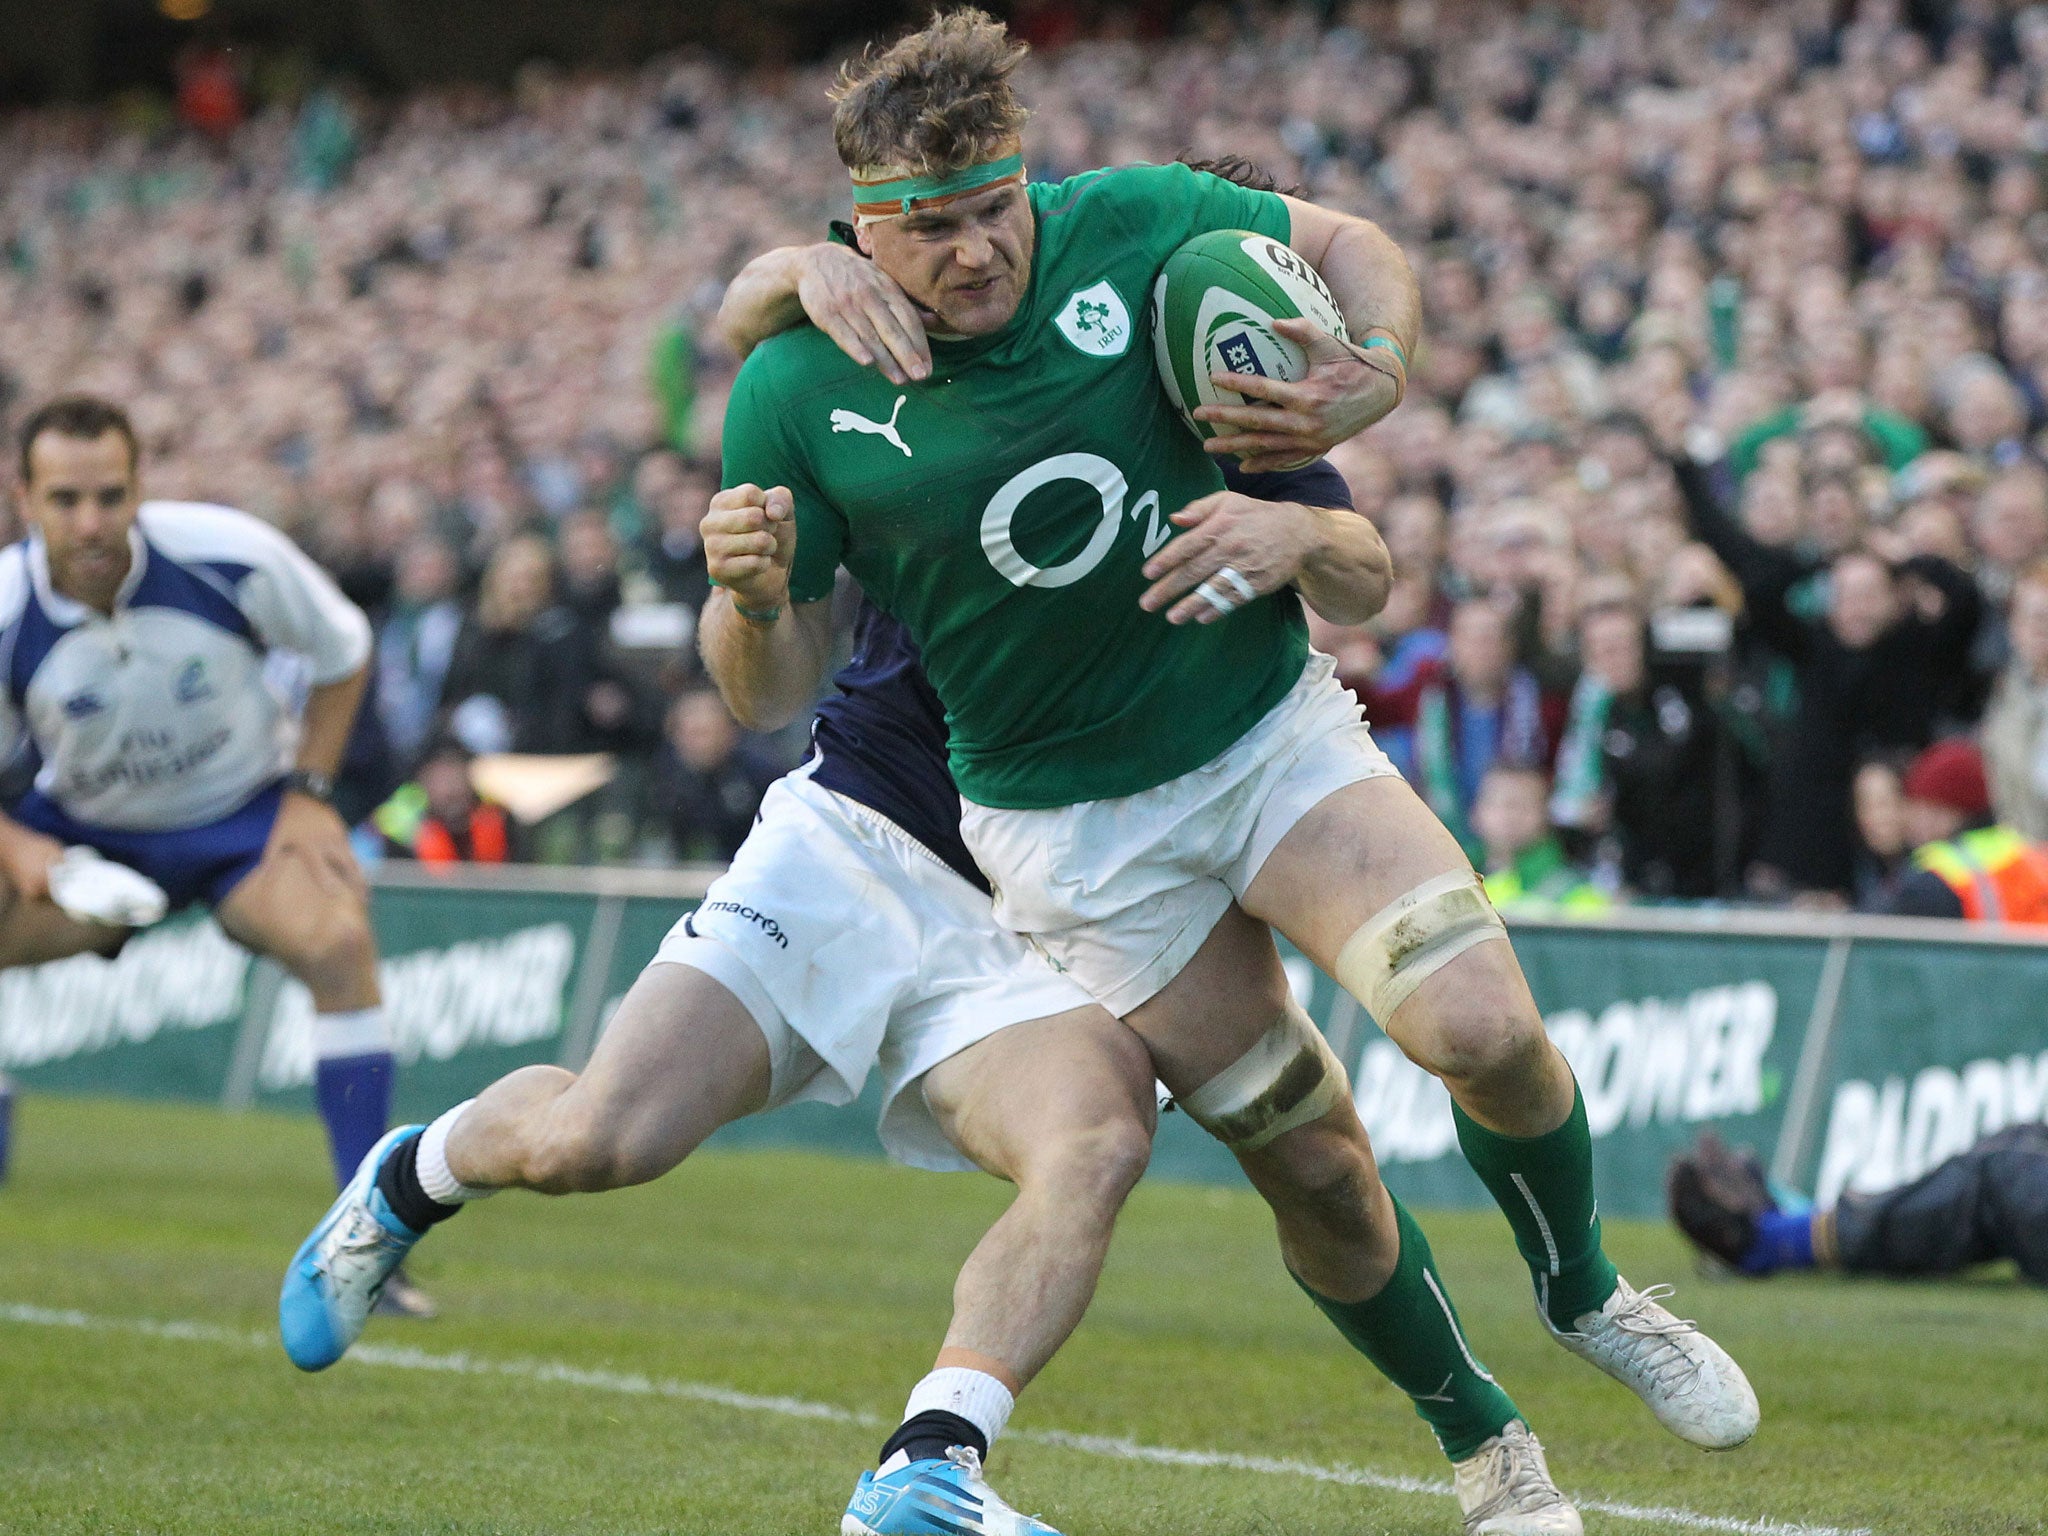 Ireland number 8 Jamie Heaslip breaks free from a tackle by Scotland's Max Evans